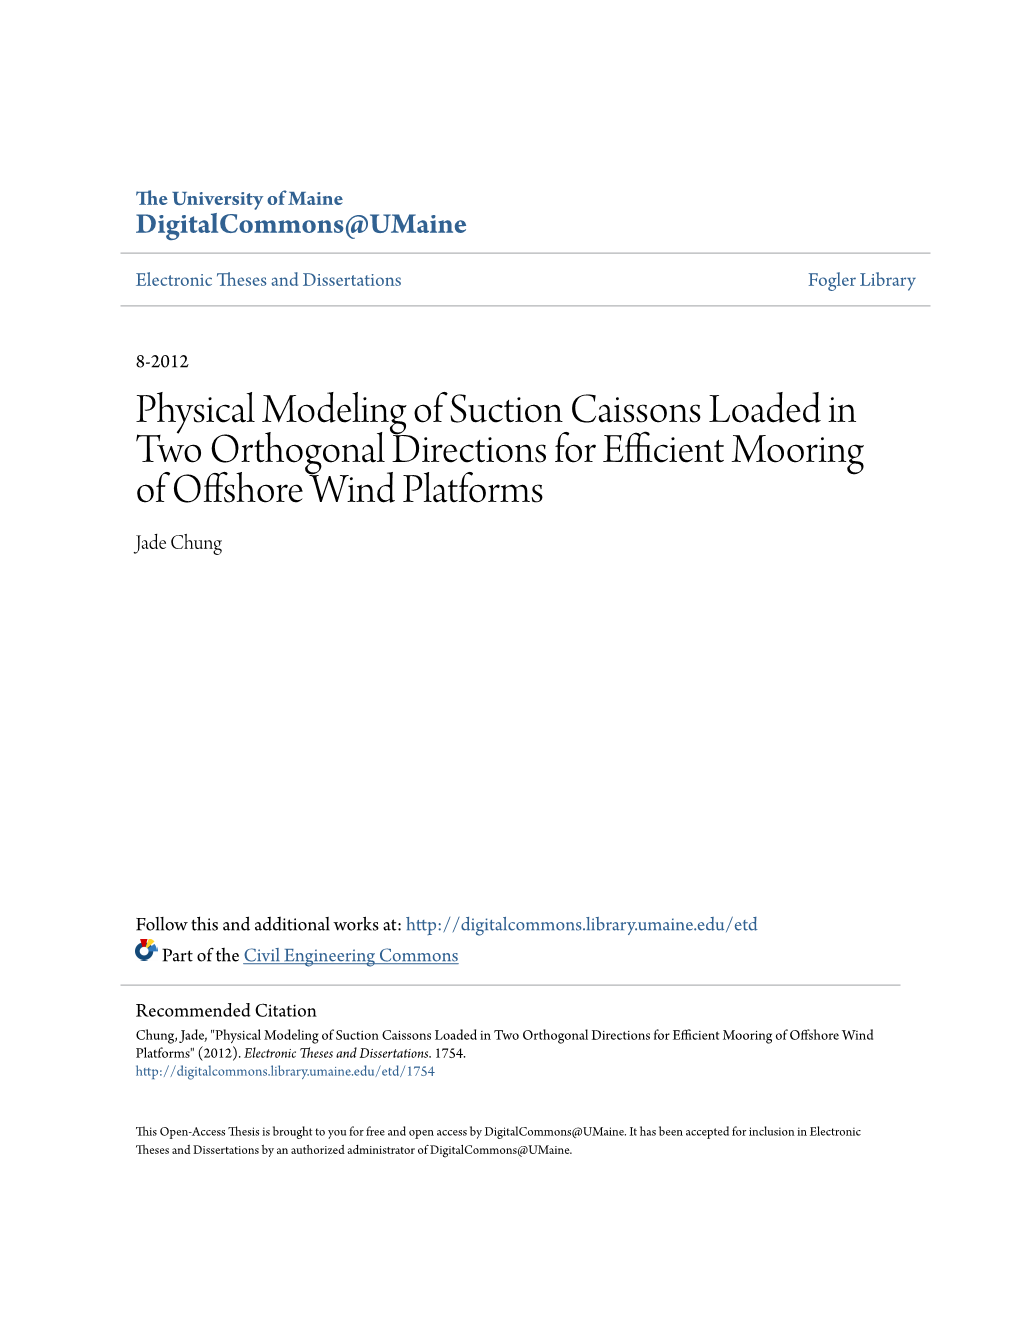 Physical Modeling of Suction Caissons Loaded in Two Orthogonal Directions for Efficient Mooring of Offshore Wind Platforms Jade Chung